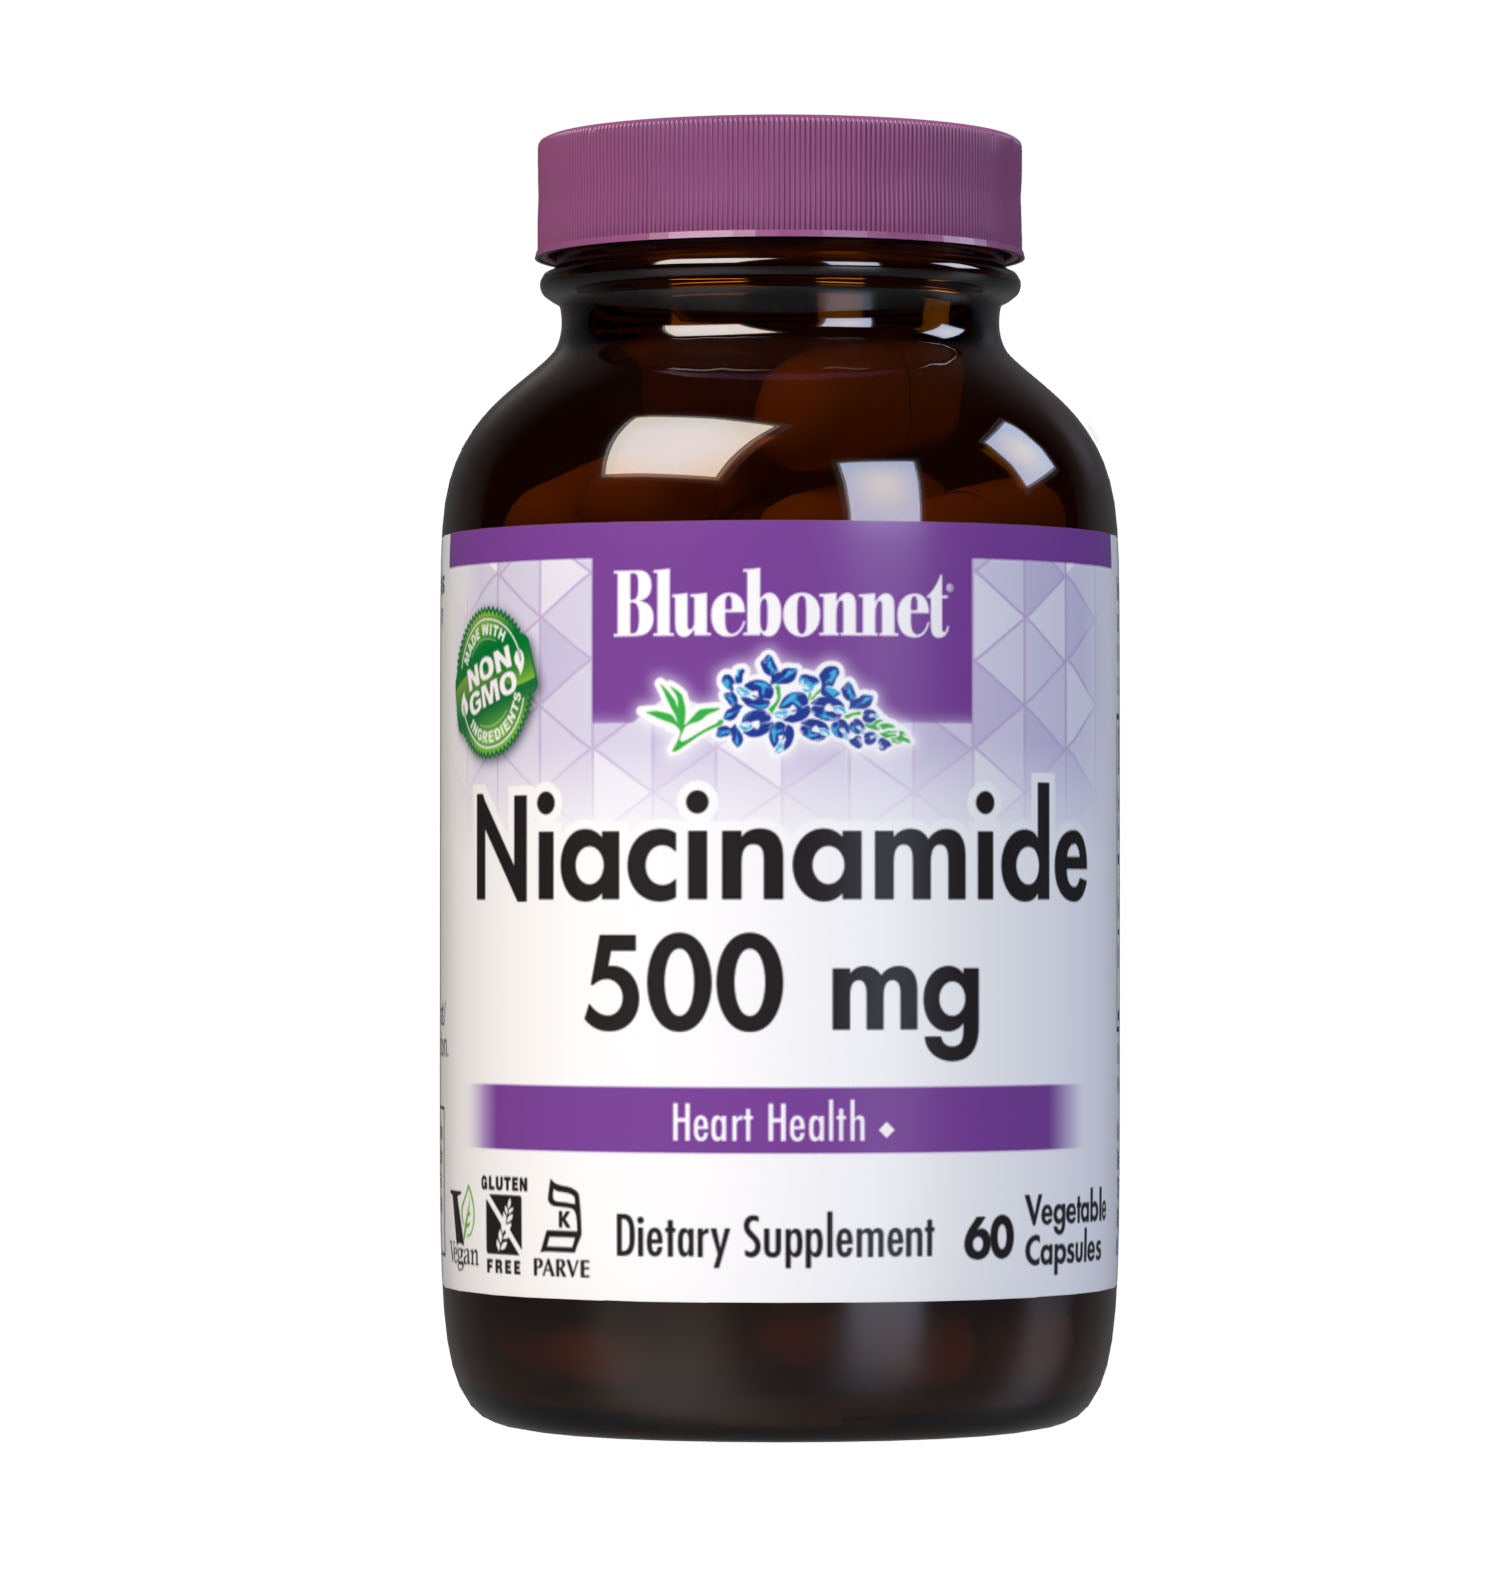 Bluebonnet’s Niacinamide 500 mg Vegetable Capsules are formulated with niacinamide in its crystalline form to help support heart health. #size_60 count